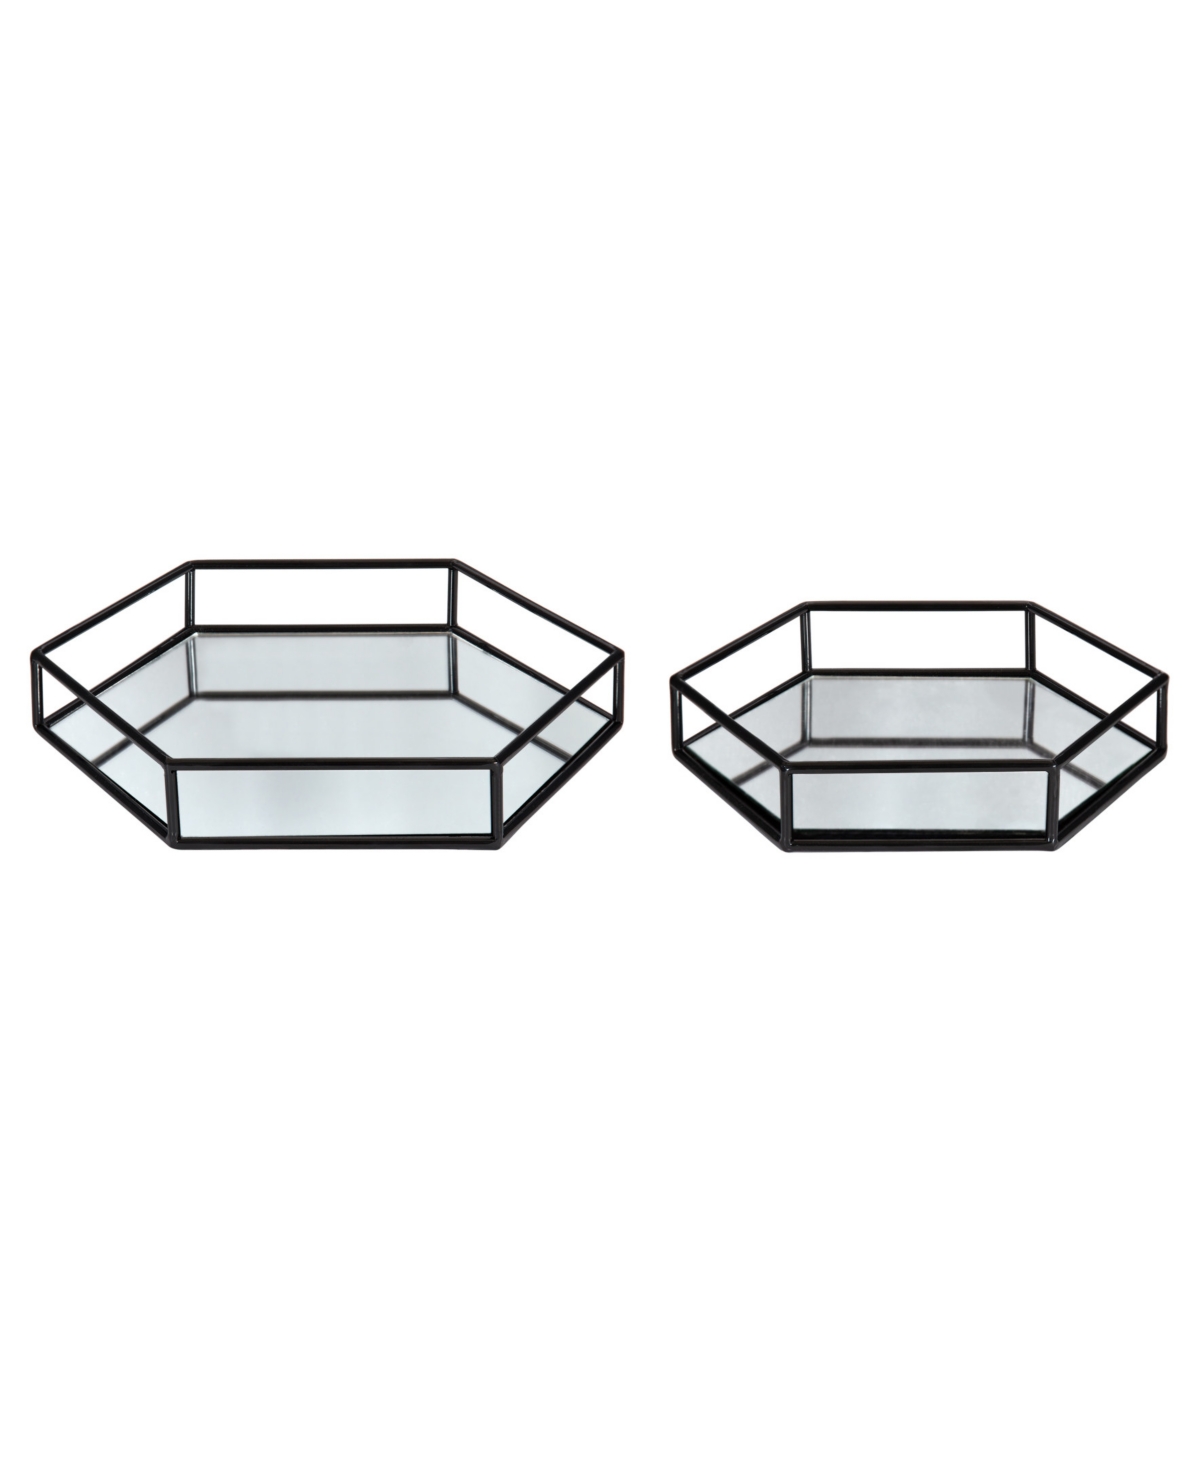 Kate And Laurel Felicia Nesting Metal Mirrored Decorative Trays, 2 Piece In Black